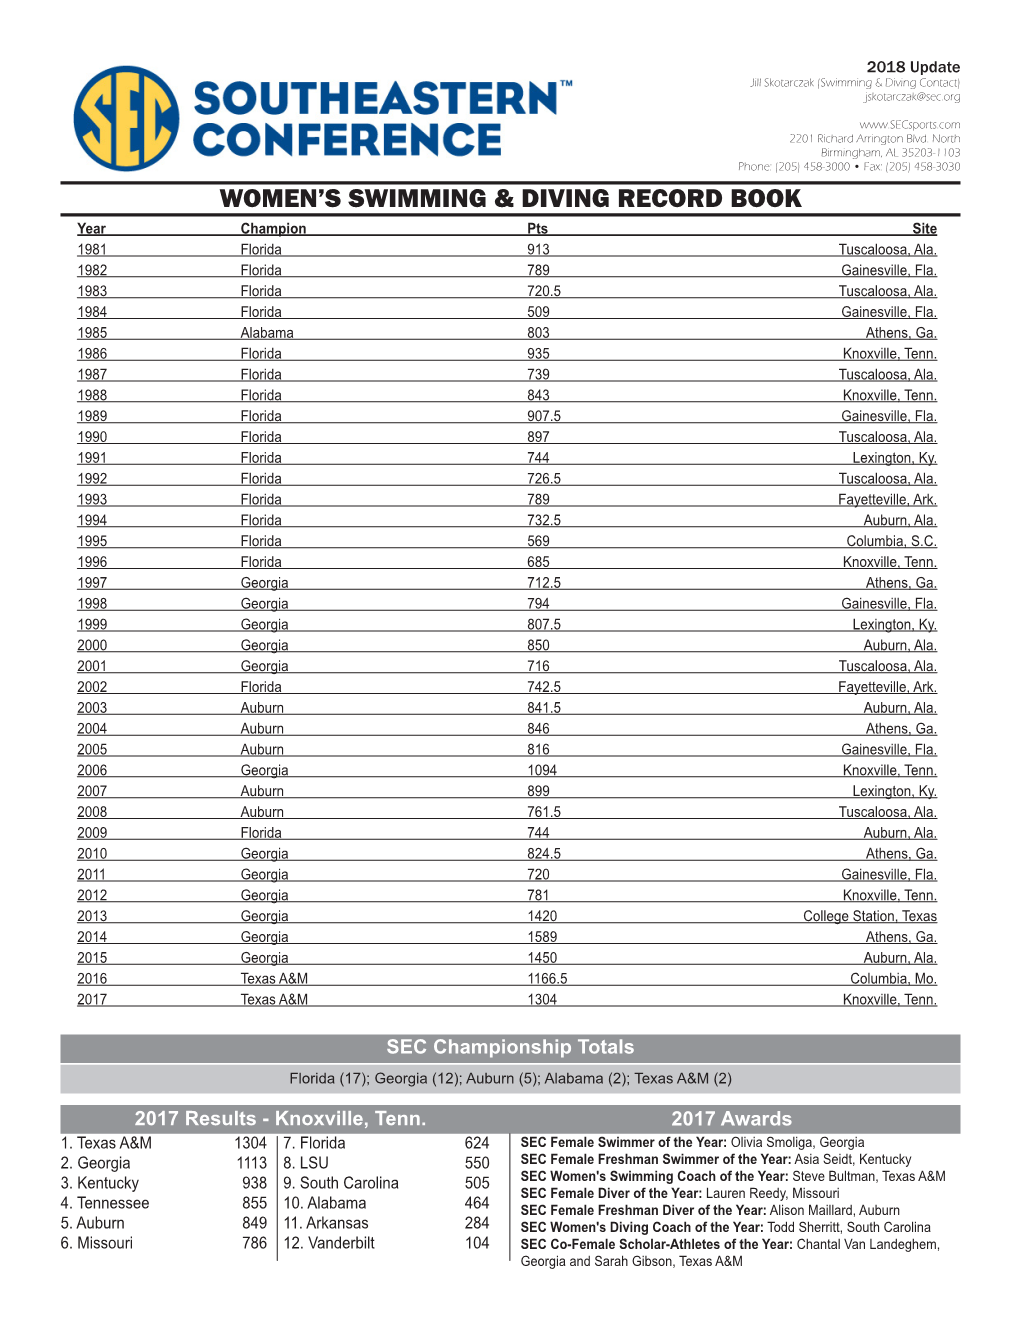 Women's Swimming & Diving Record Book